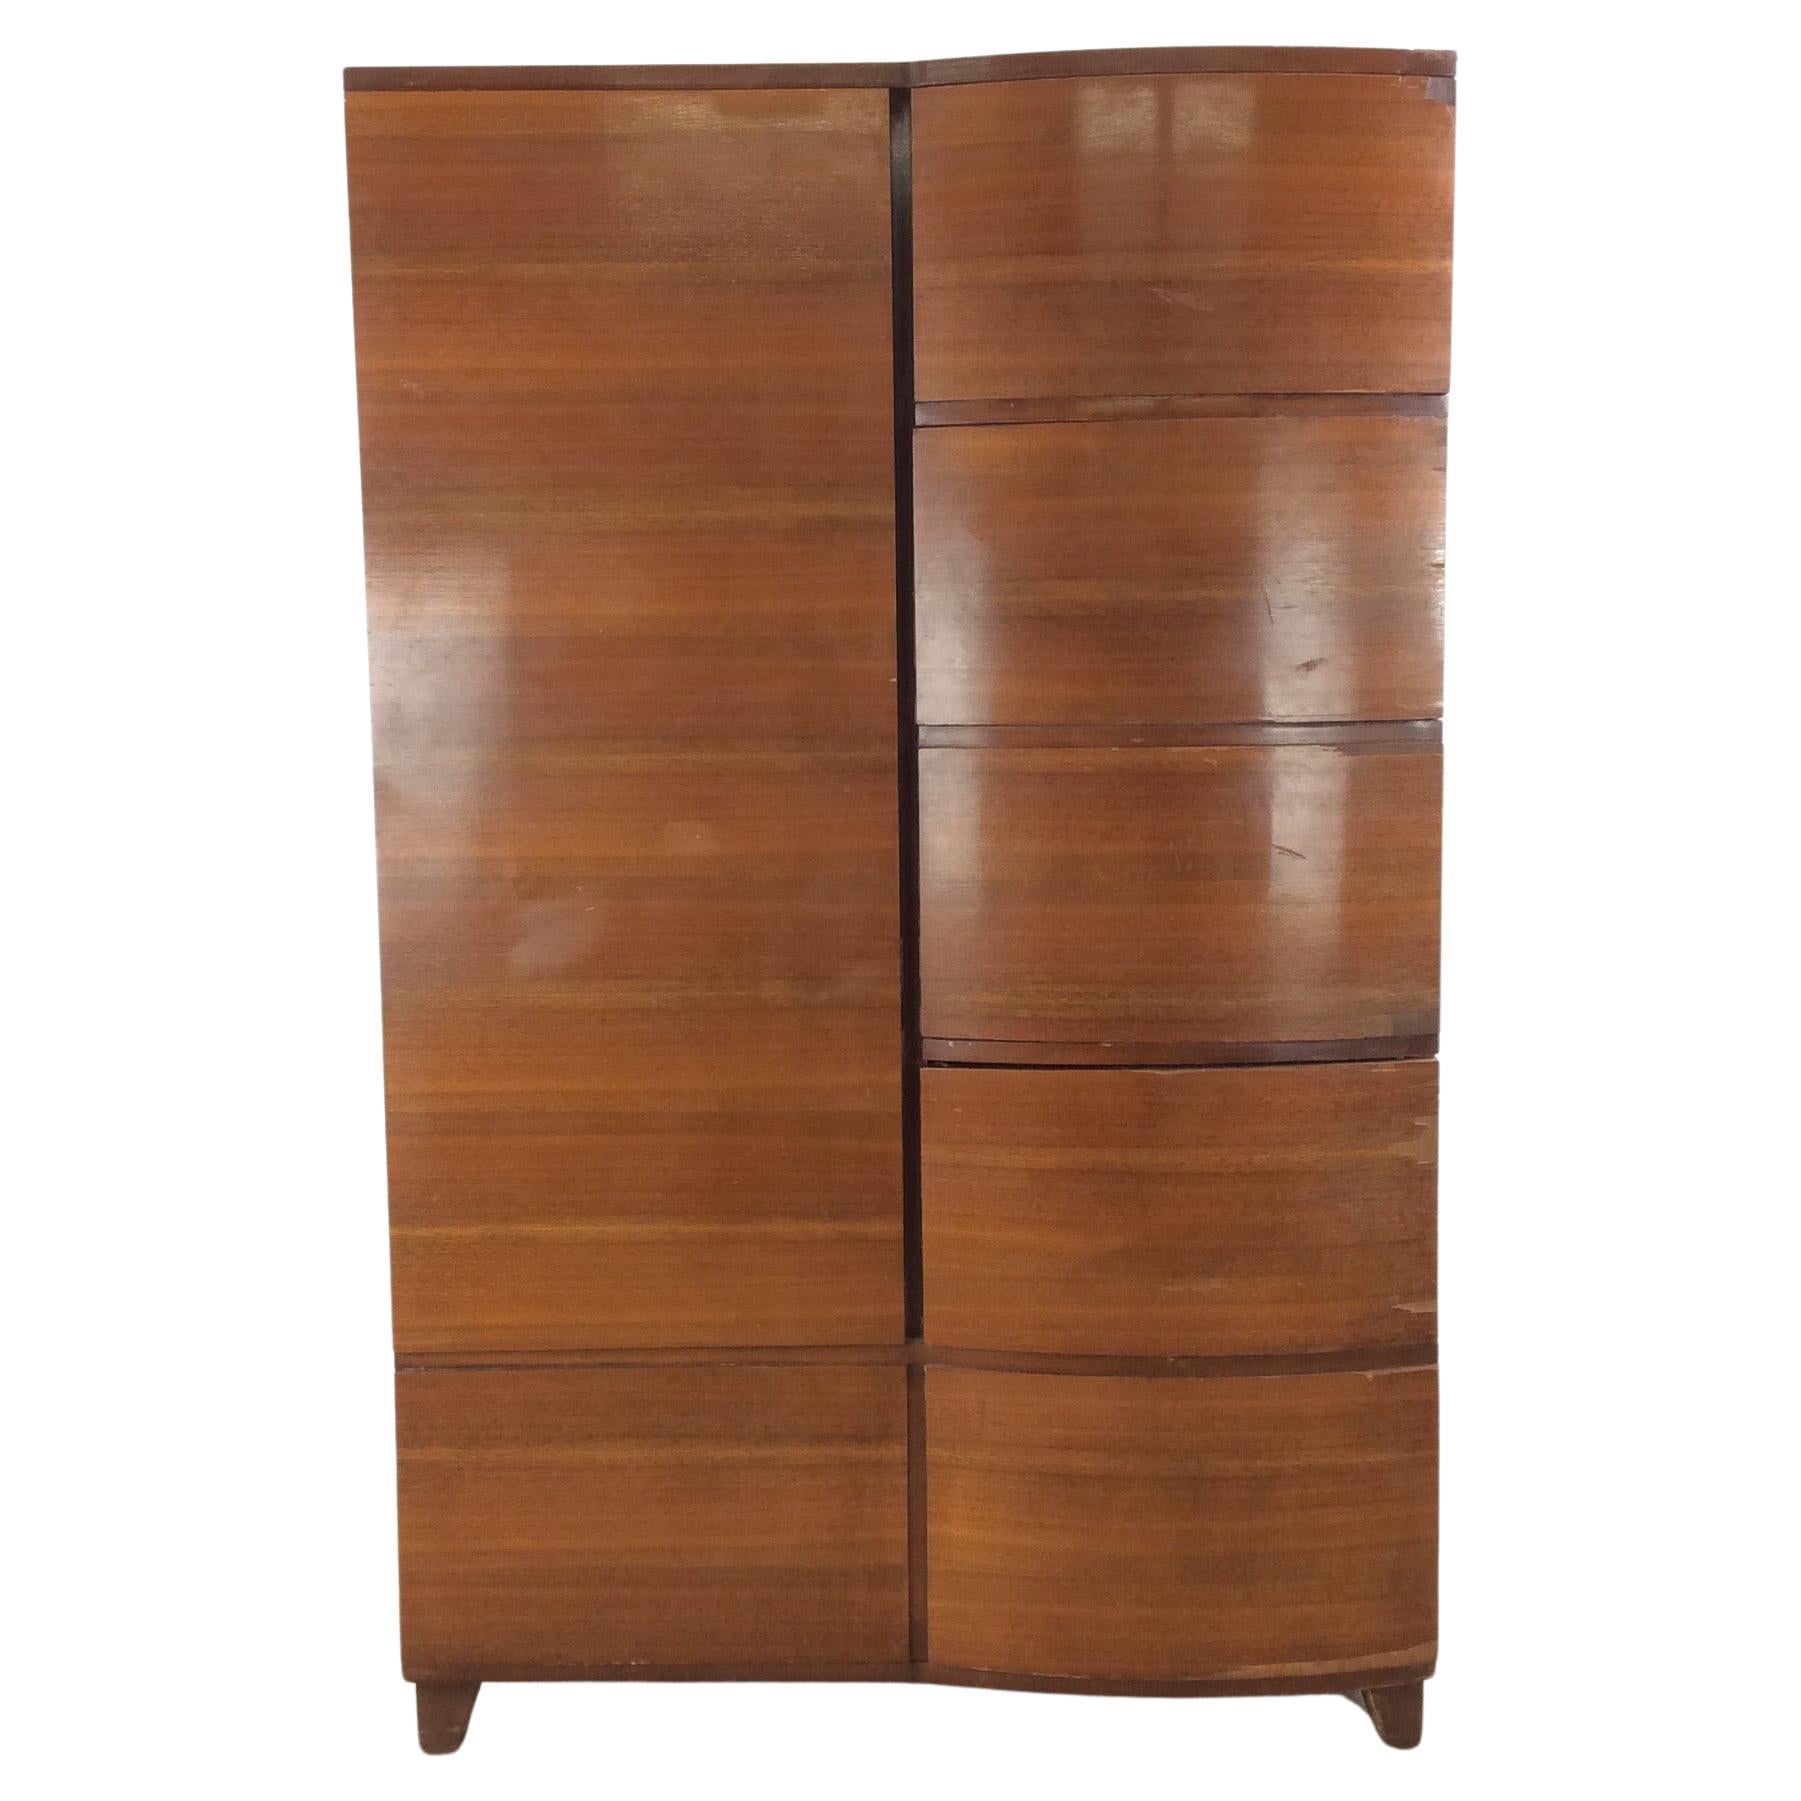 Art Deco Cedar Lined Armoire with 4 Drawers